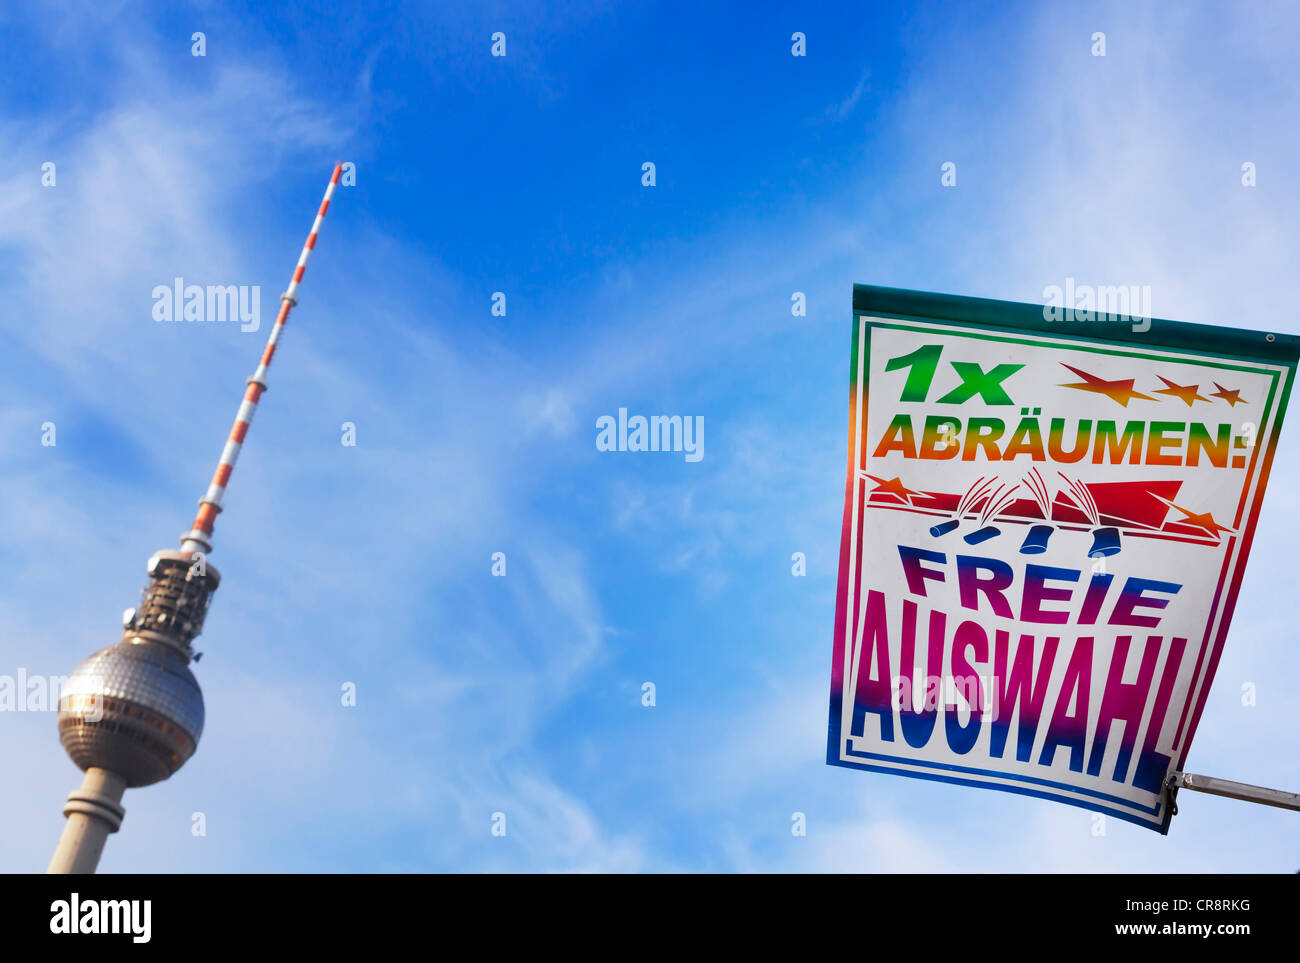 '1x abraeumen, freie Auswahl', German for 'clear all, free selection' on a fairground, banner in front of TV tower at Stock Photo